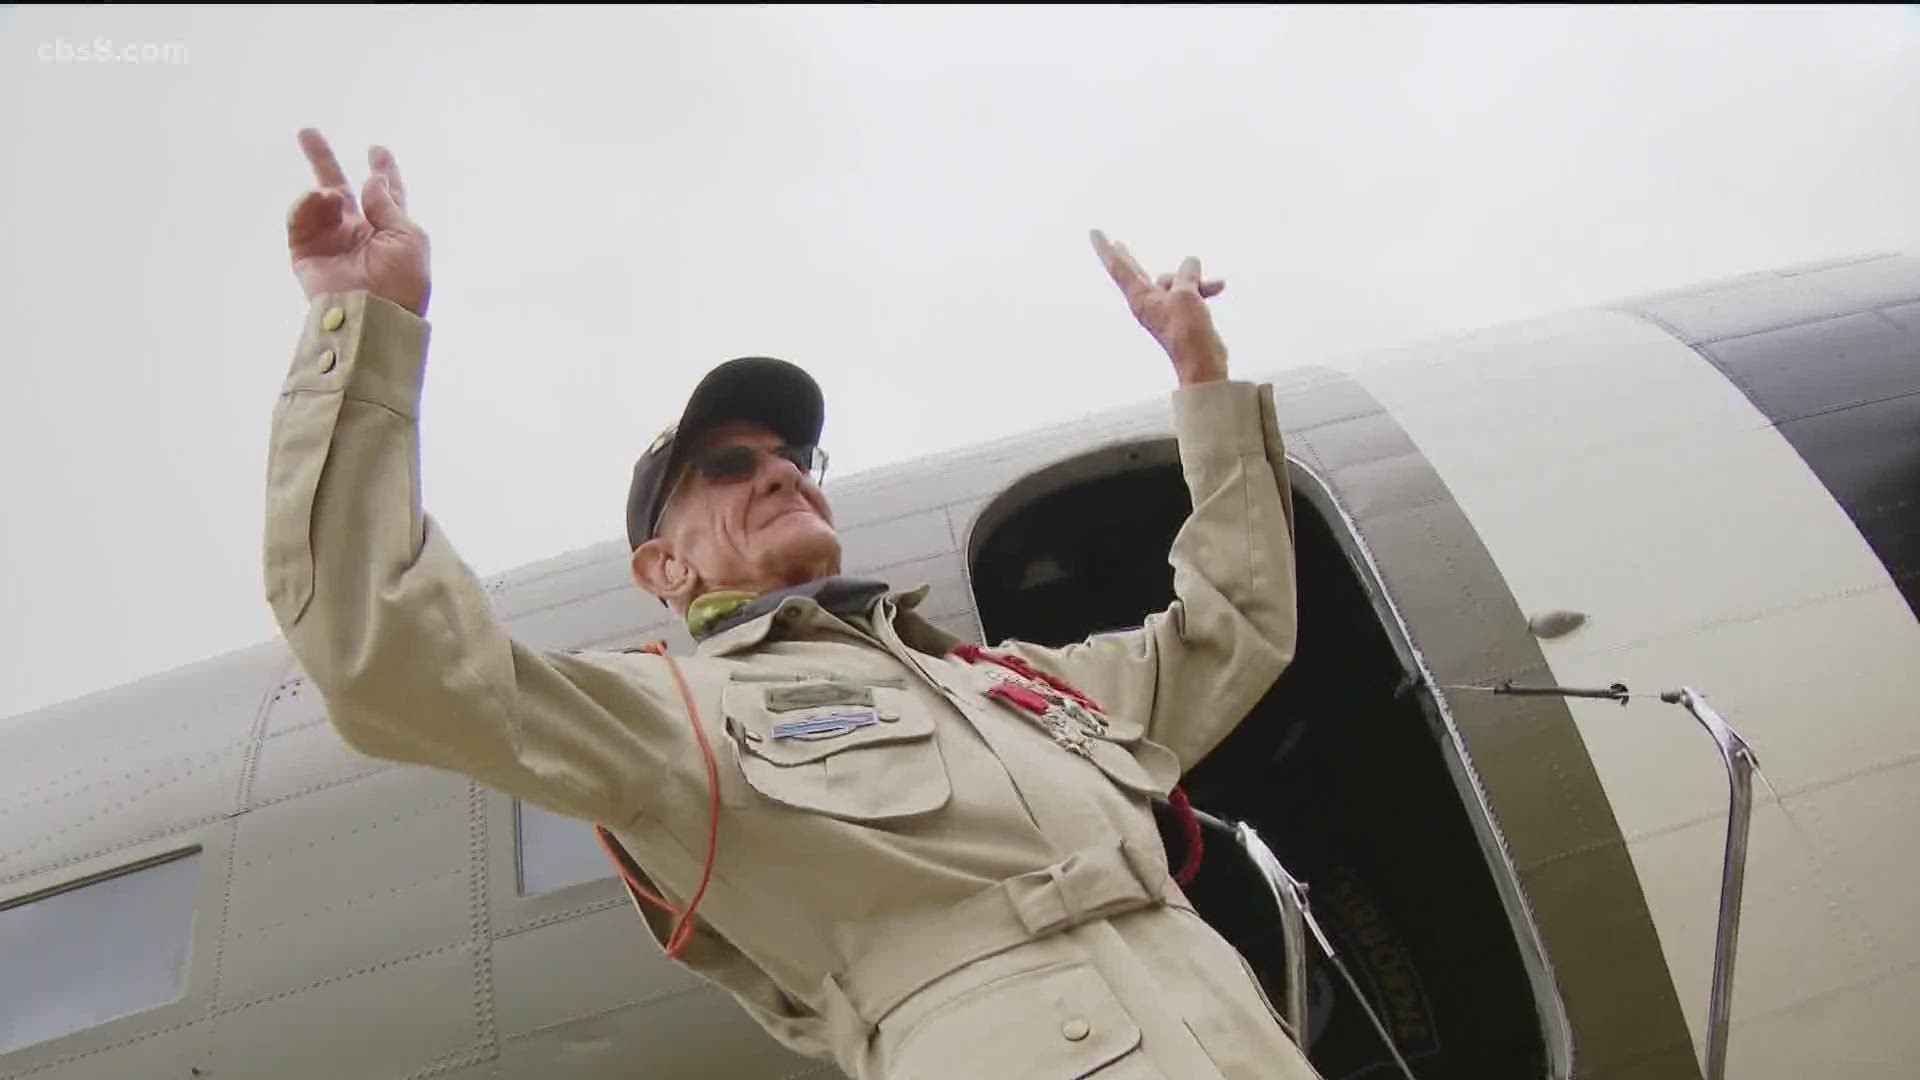 Last year to celebrate the anniversary, Tom Rice jumped out of a C47 just like he did 75 years before.